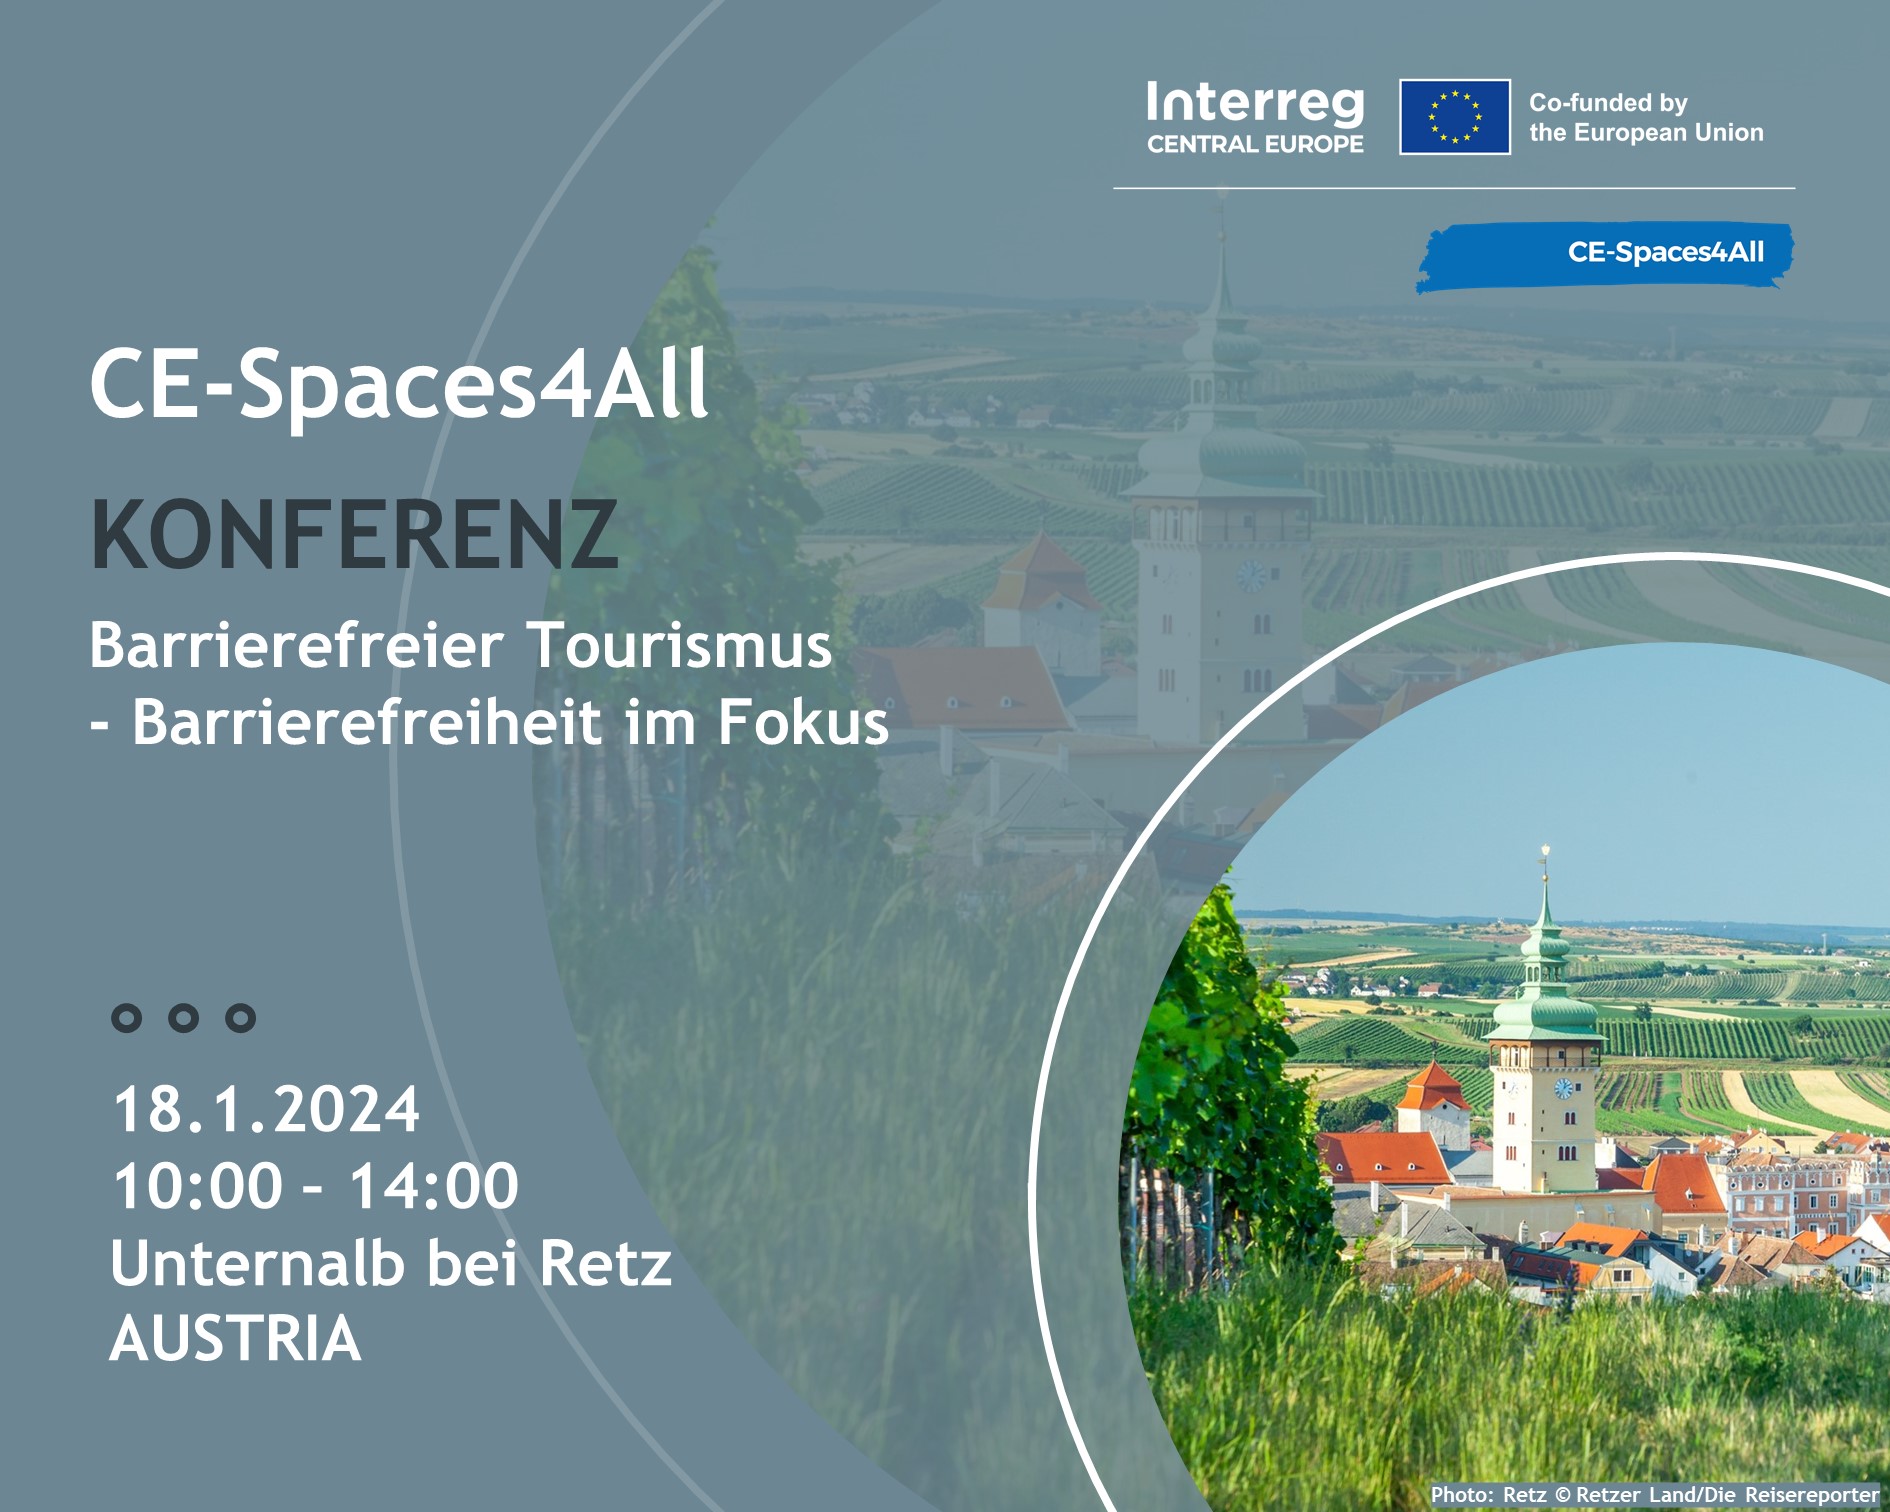 Accessible Tourism conference in Unternalb, Austria